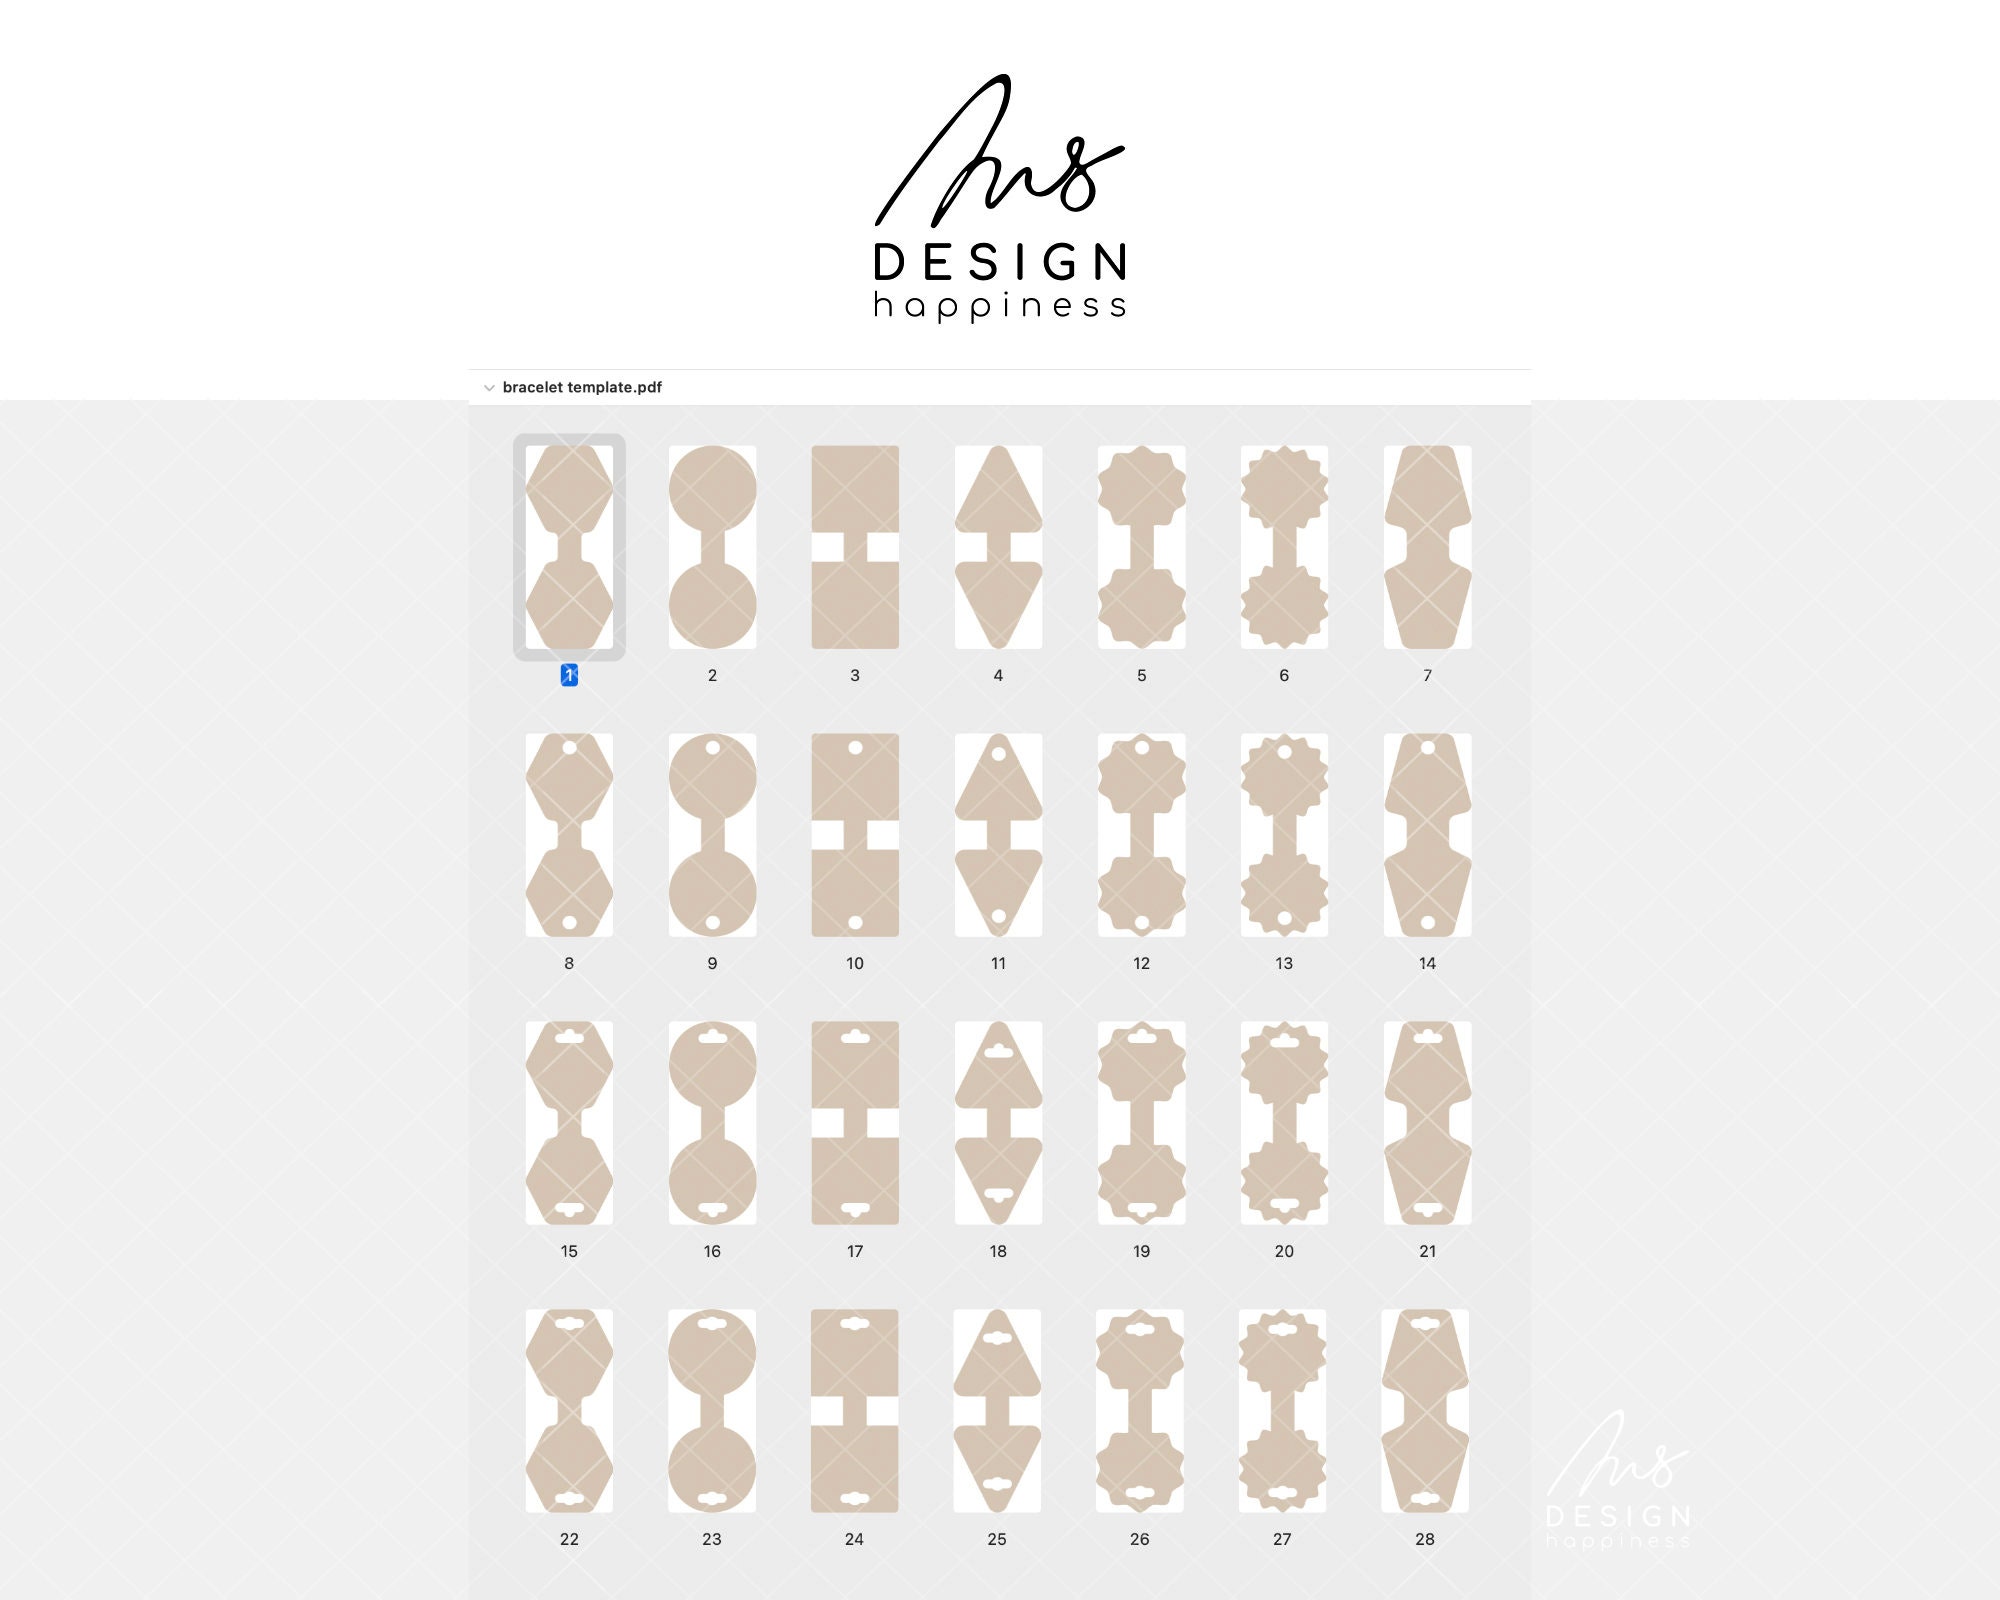 Bracelet Display Card Template SVG, Jewelry Packaging Template SVG, Jewelry  Card DXF Cut Files for Cricut, Png, Eps, Pdf for Hand Cutting. 